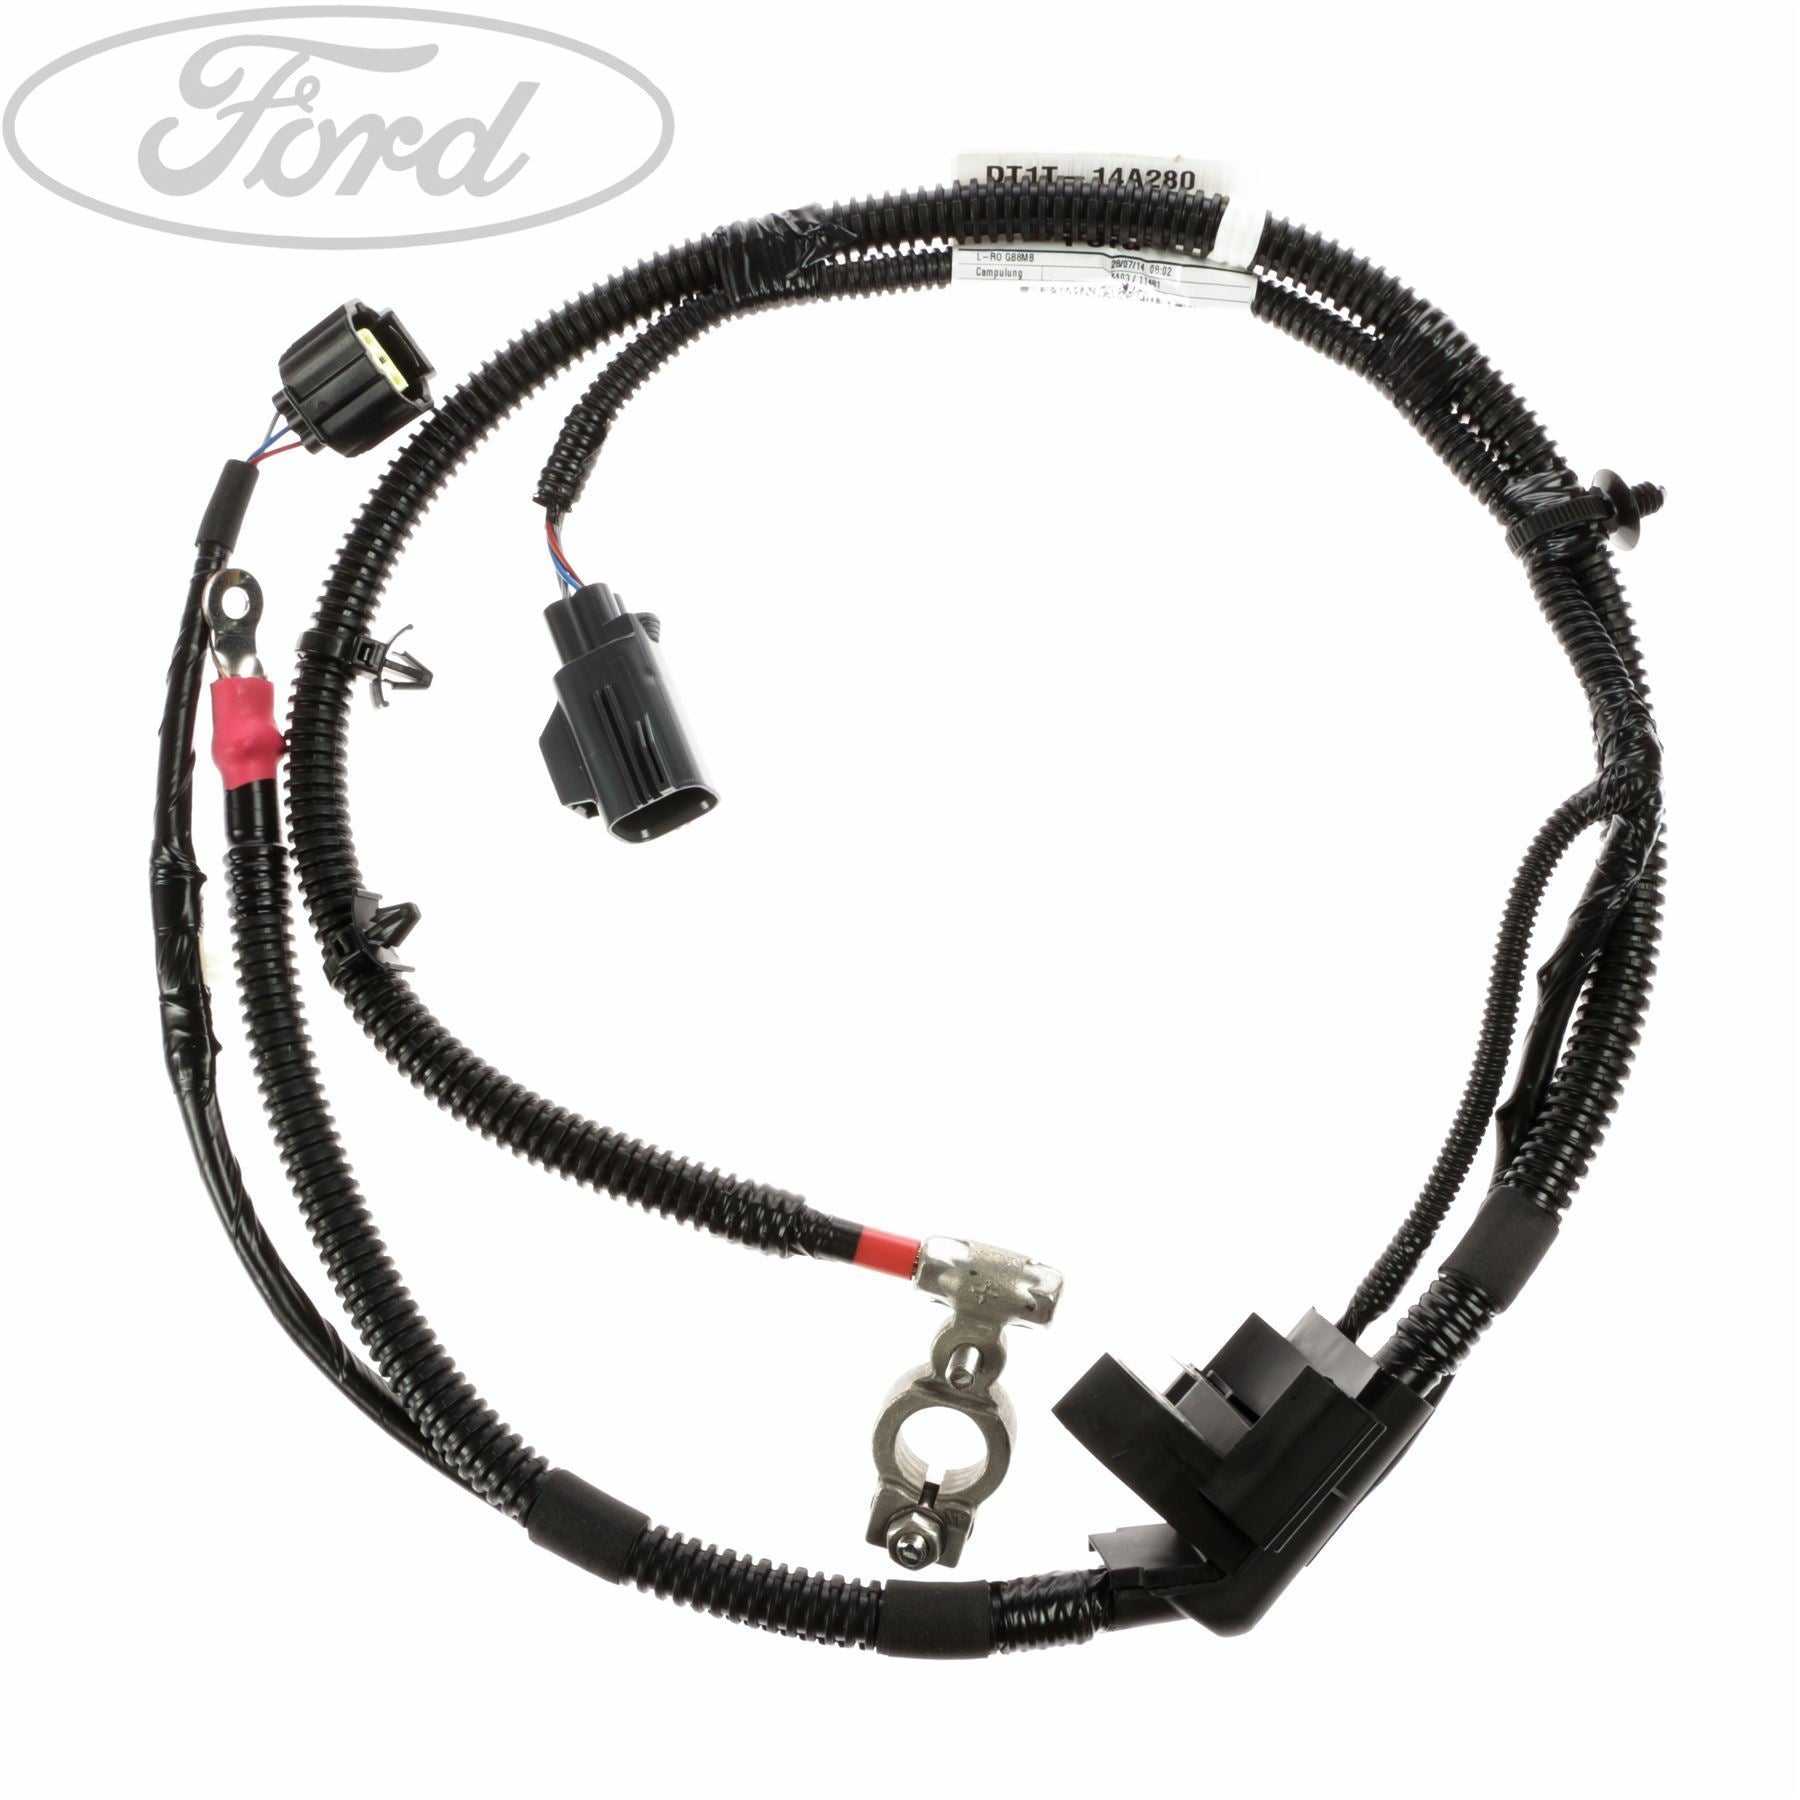 Ford, TRANSIT CONNECT POSITIVE BATTERY CABLE